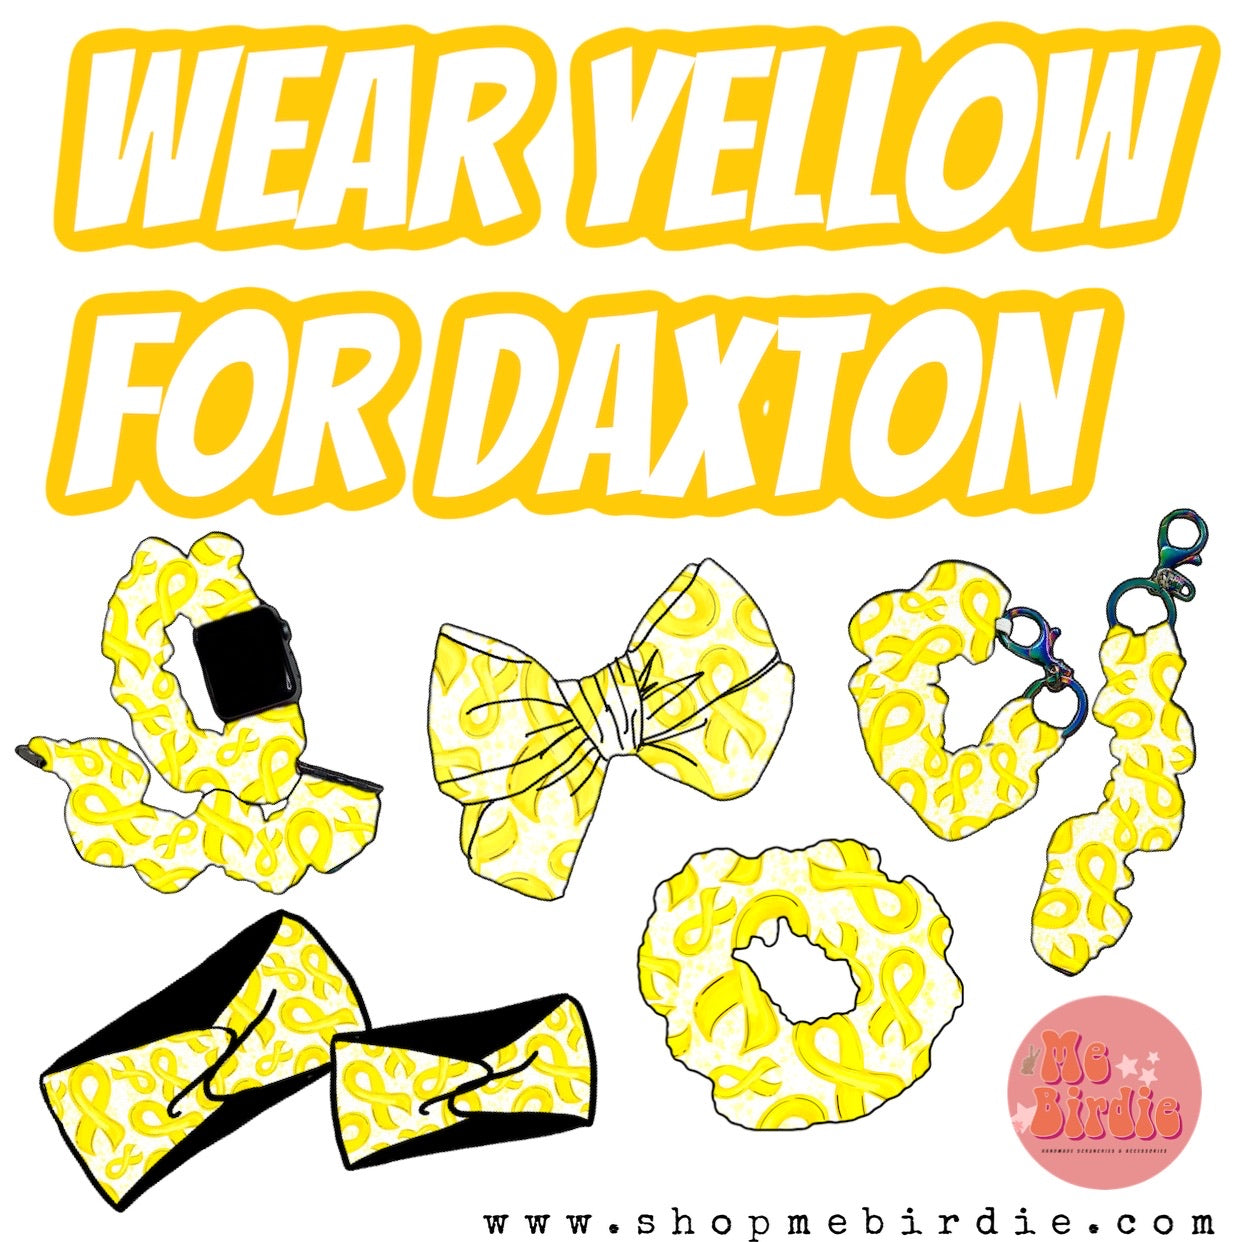 Wear yellow for Daxton Fundraiser